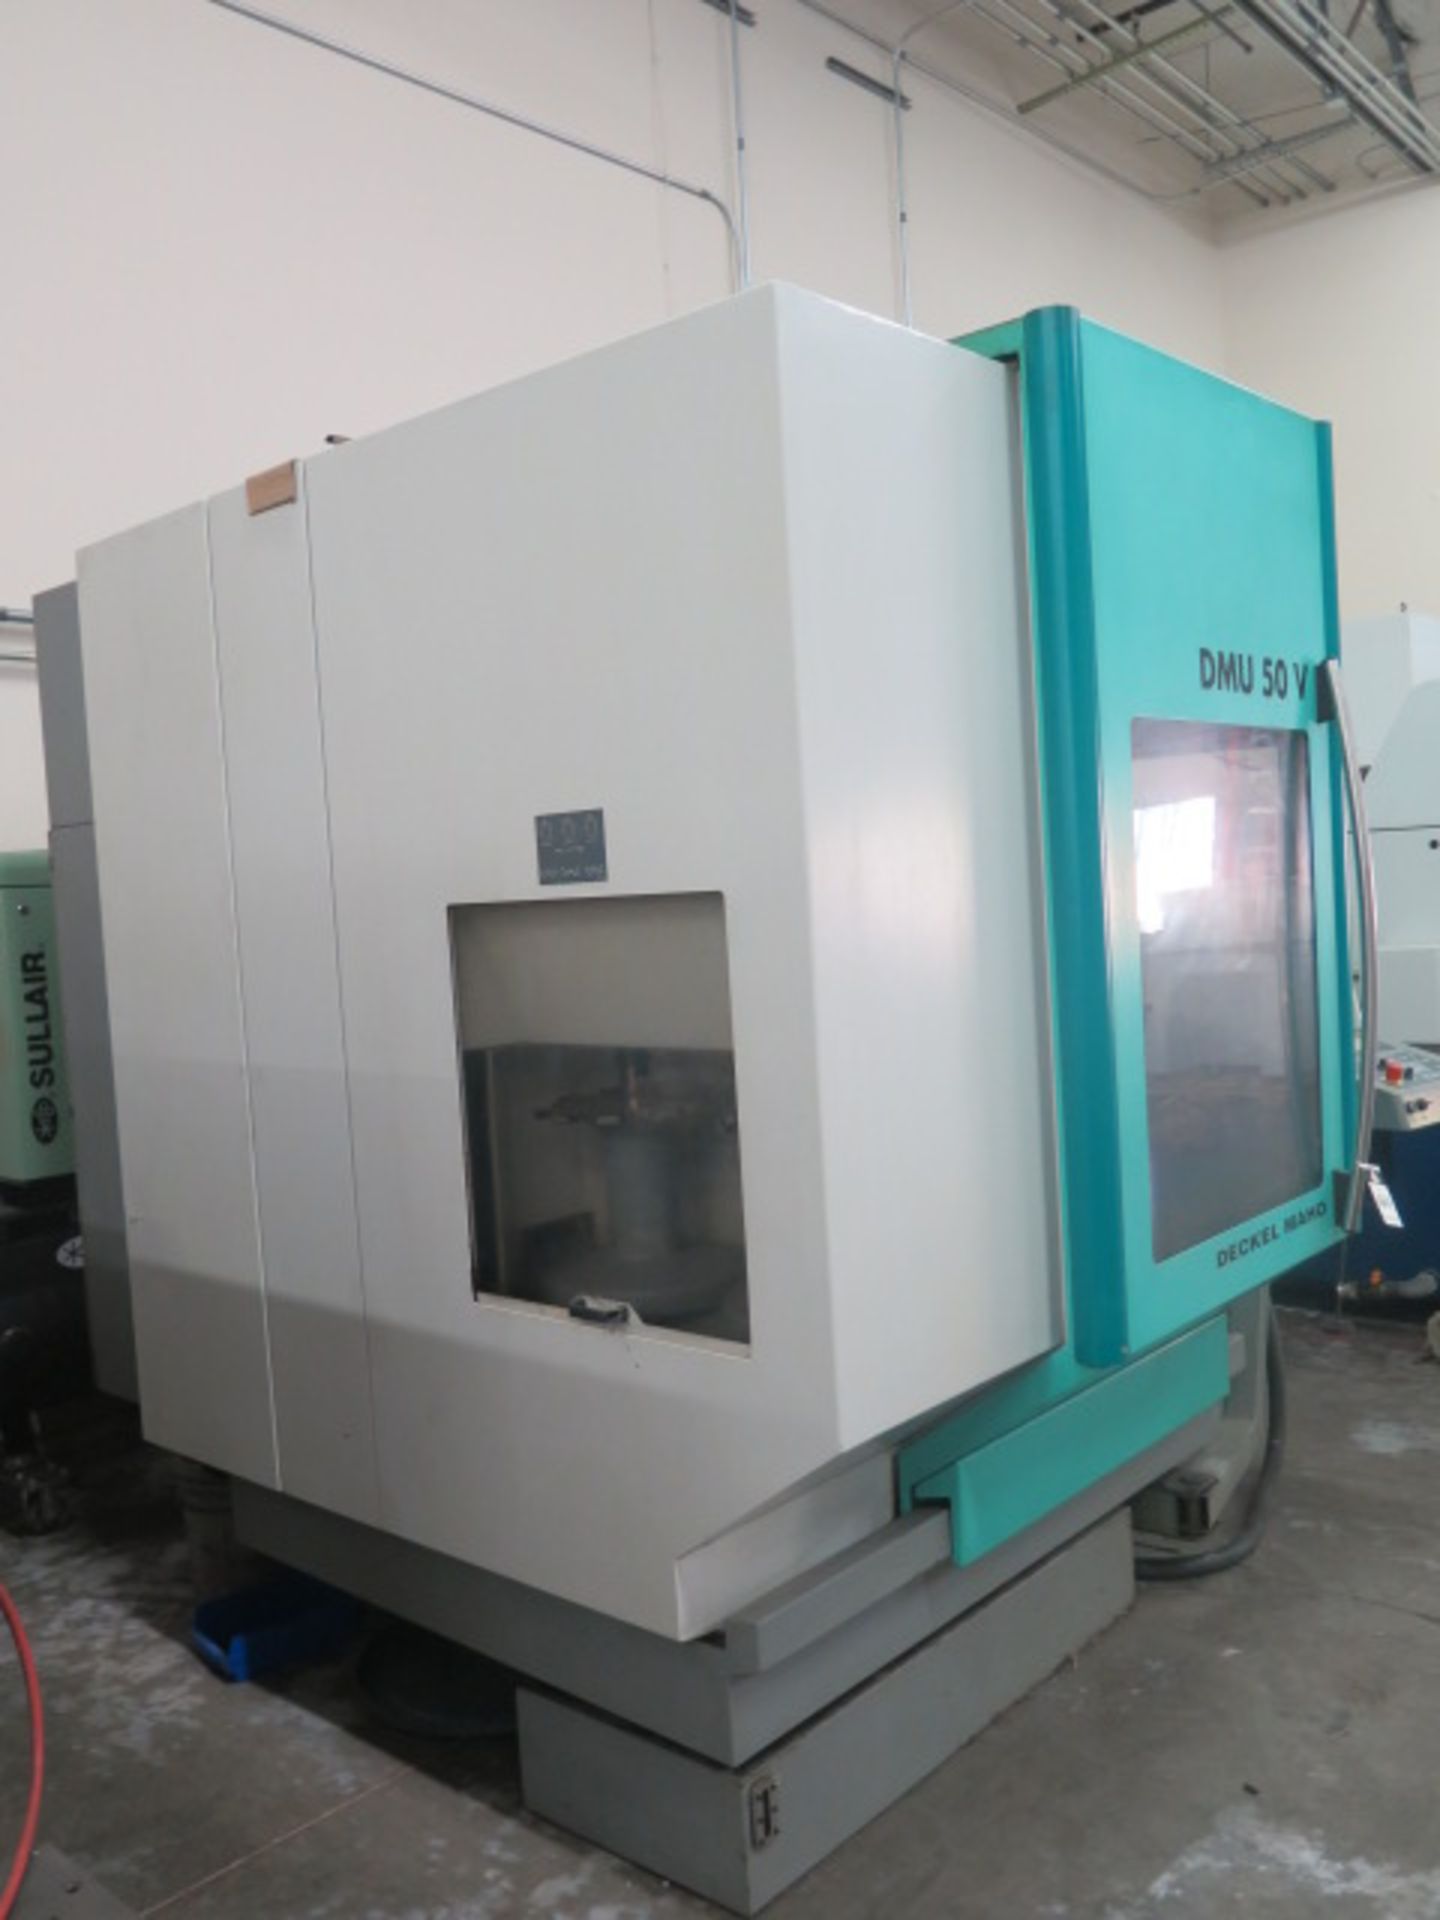 Deckel MAHO DMU50V 4-Axis CNC Vertical Machining Center (NEEDS WORK) s/n 054820 w/ Deckel Mill - Image 3 of 13